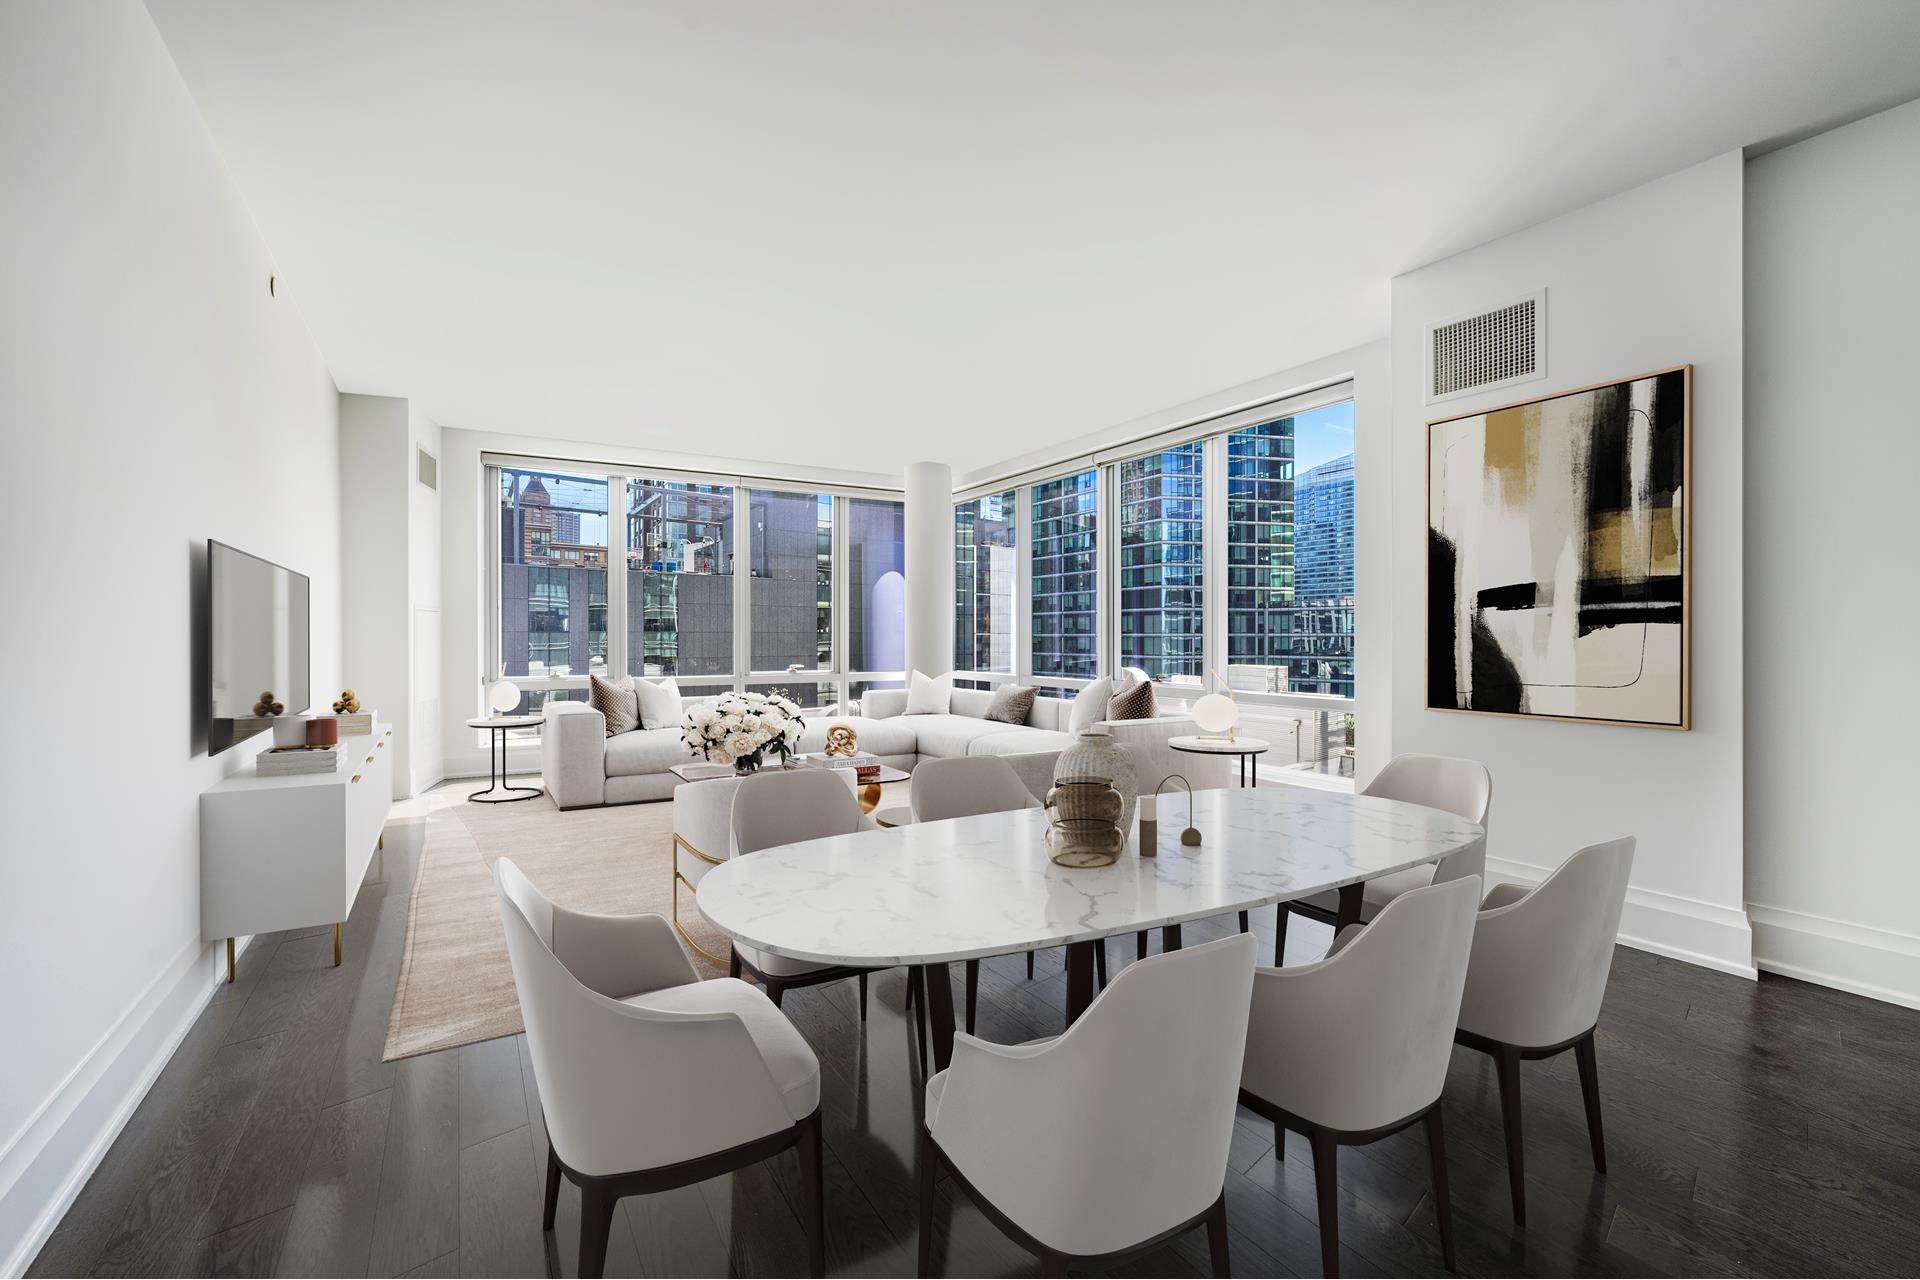 50 Riverside Boulevard 10D, Lincoln Sq, Upper West Side, NYC - 3 Bedrooms  
3.5 Bathrooms  
6 Rooms - 